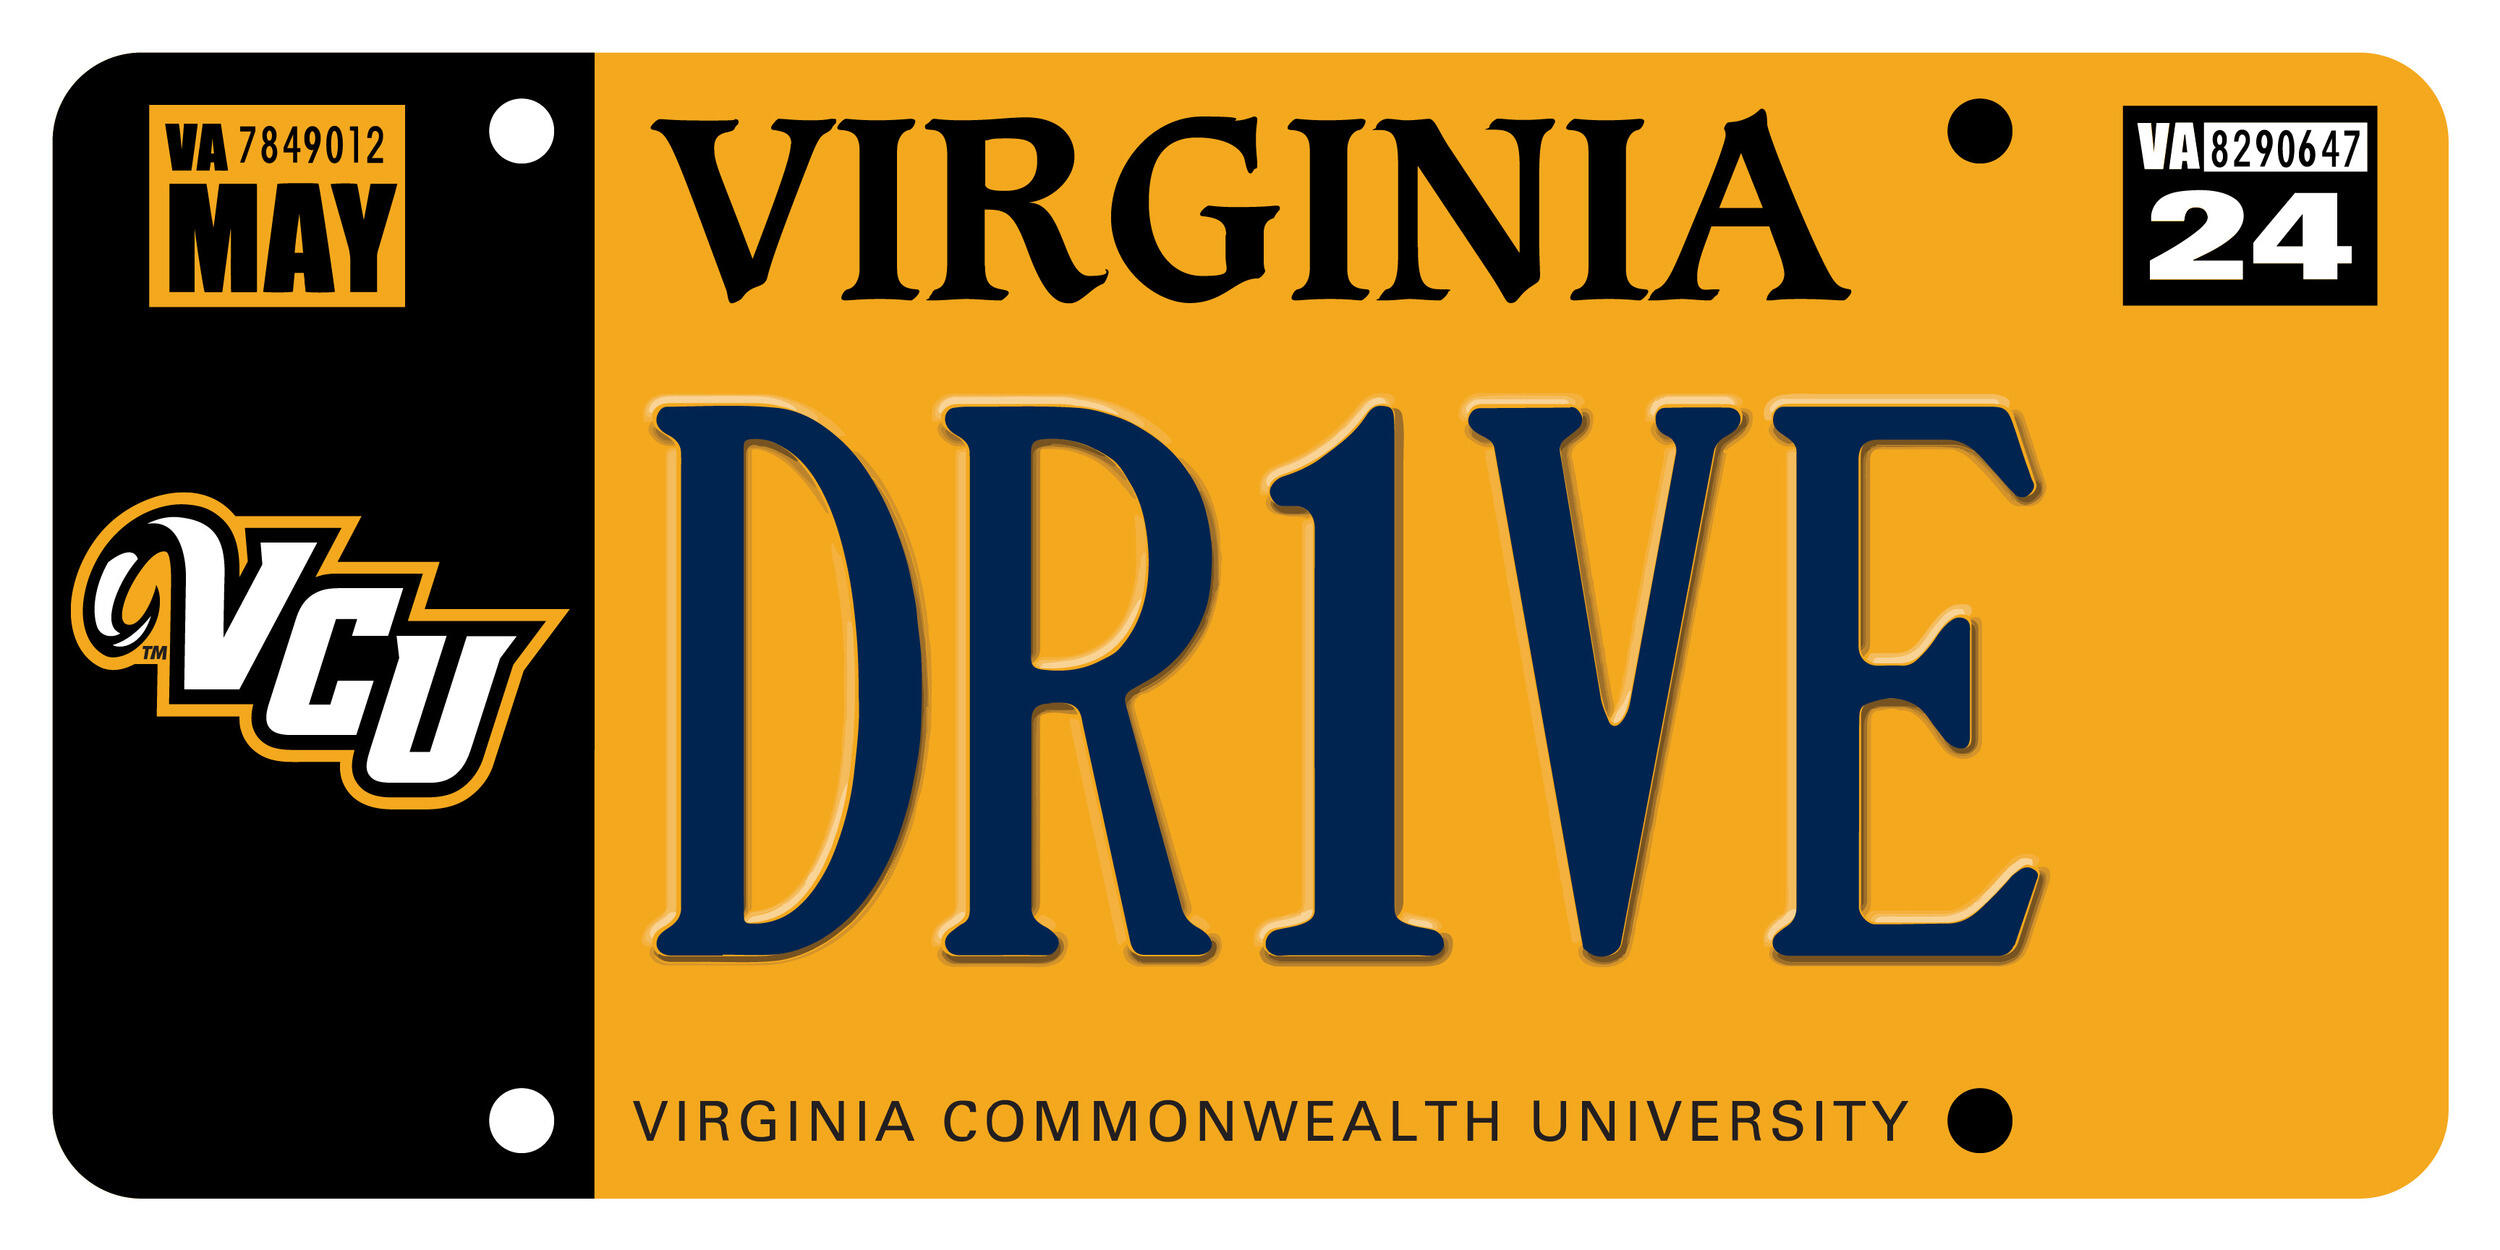 A photo of a yellow license plate that has a black strip on the left side. On top of the black strip are letter's that spell out \"VCU\" 